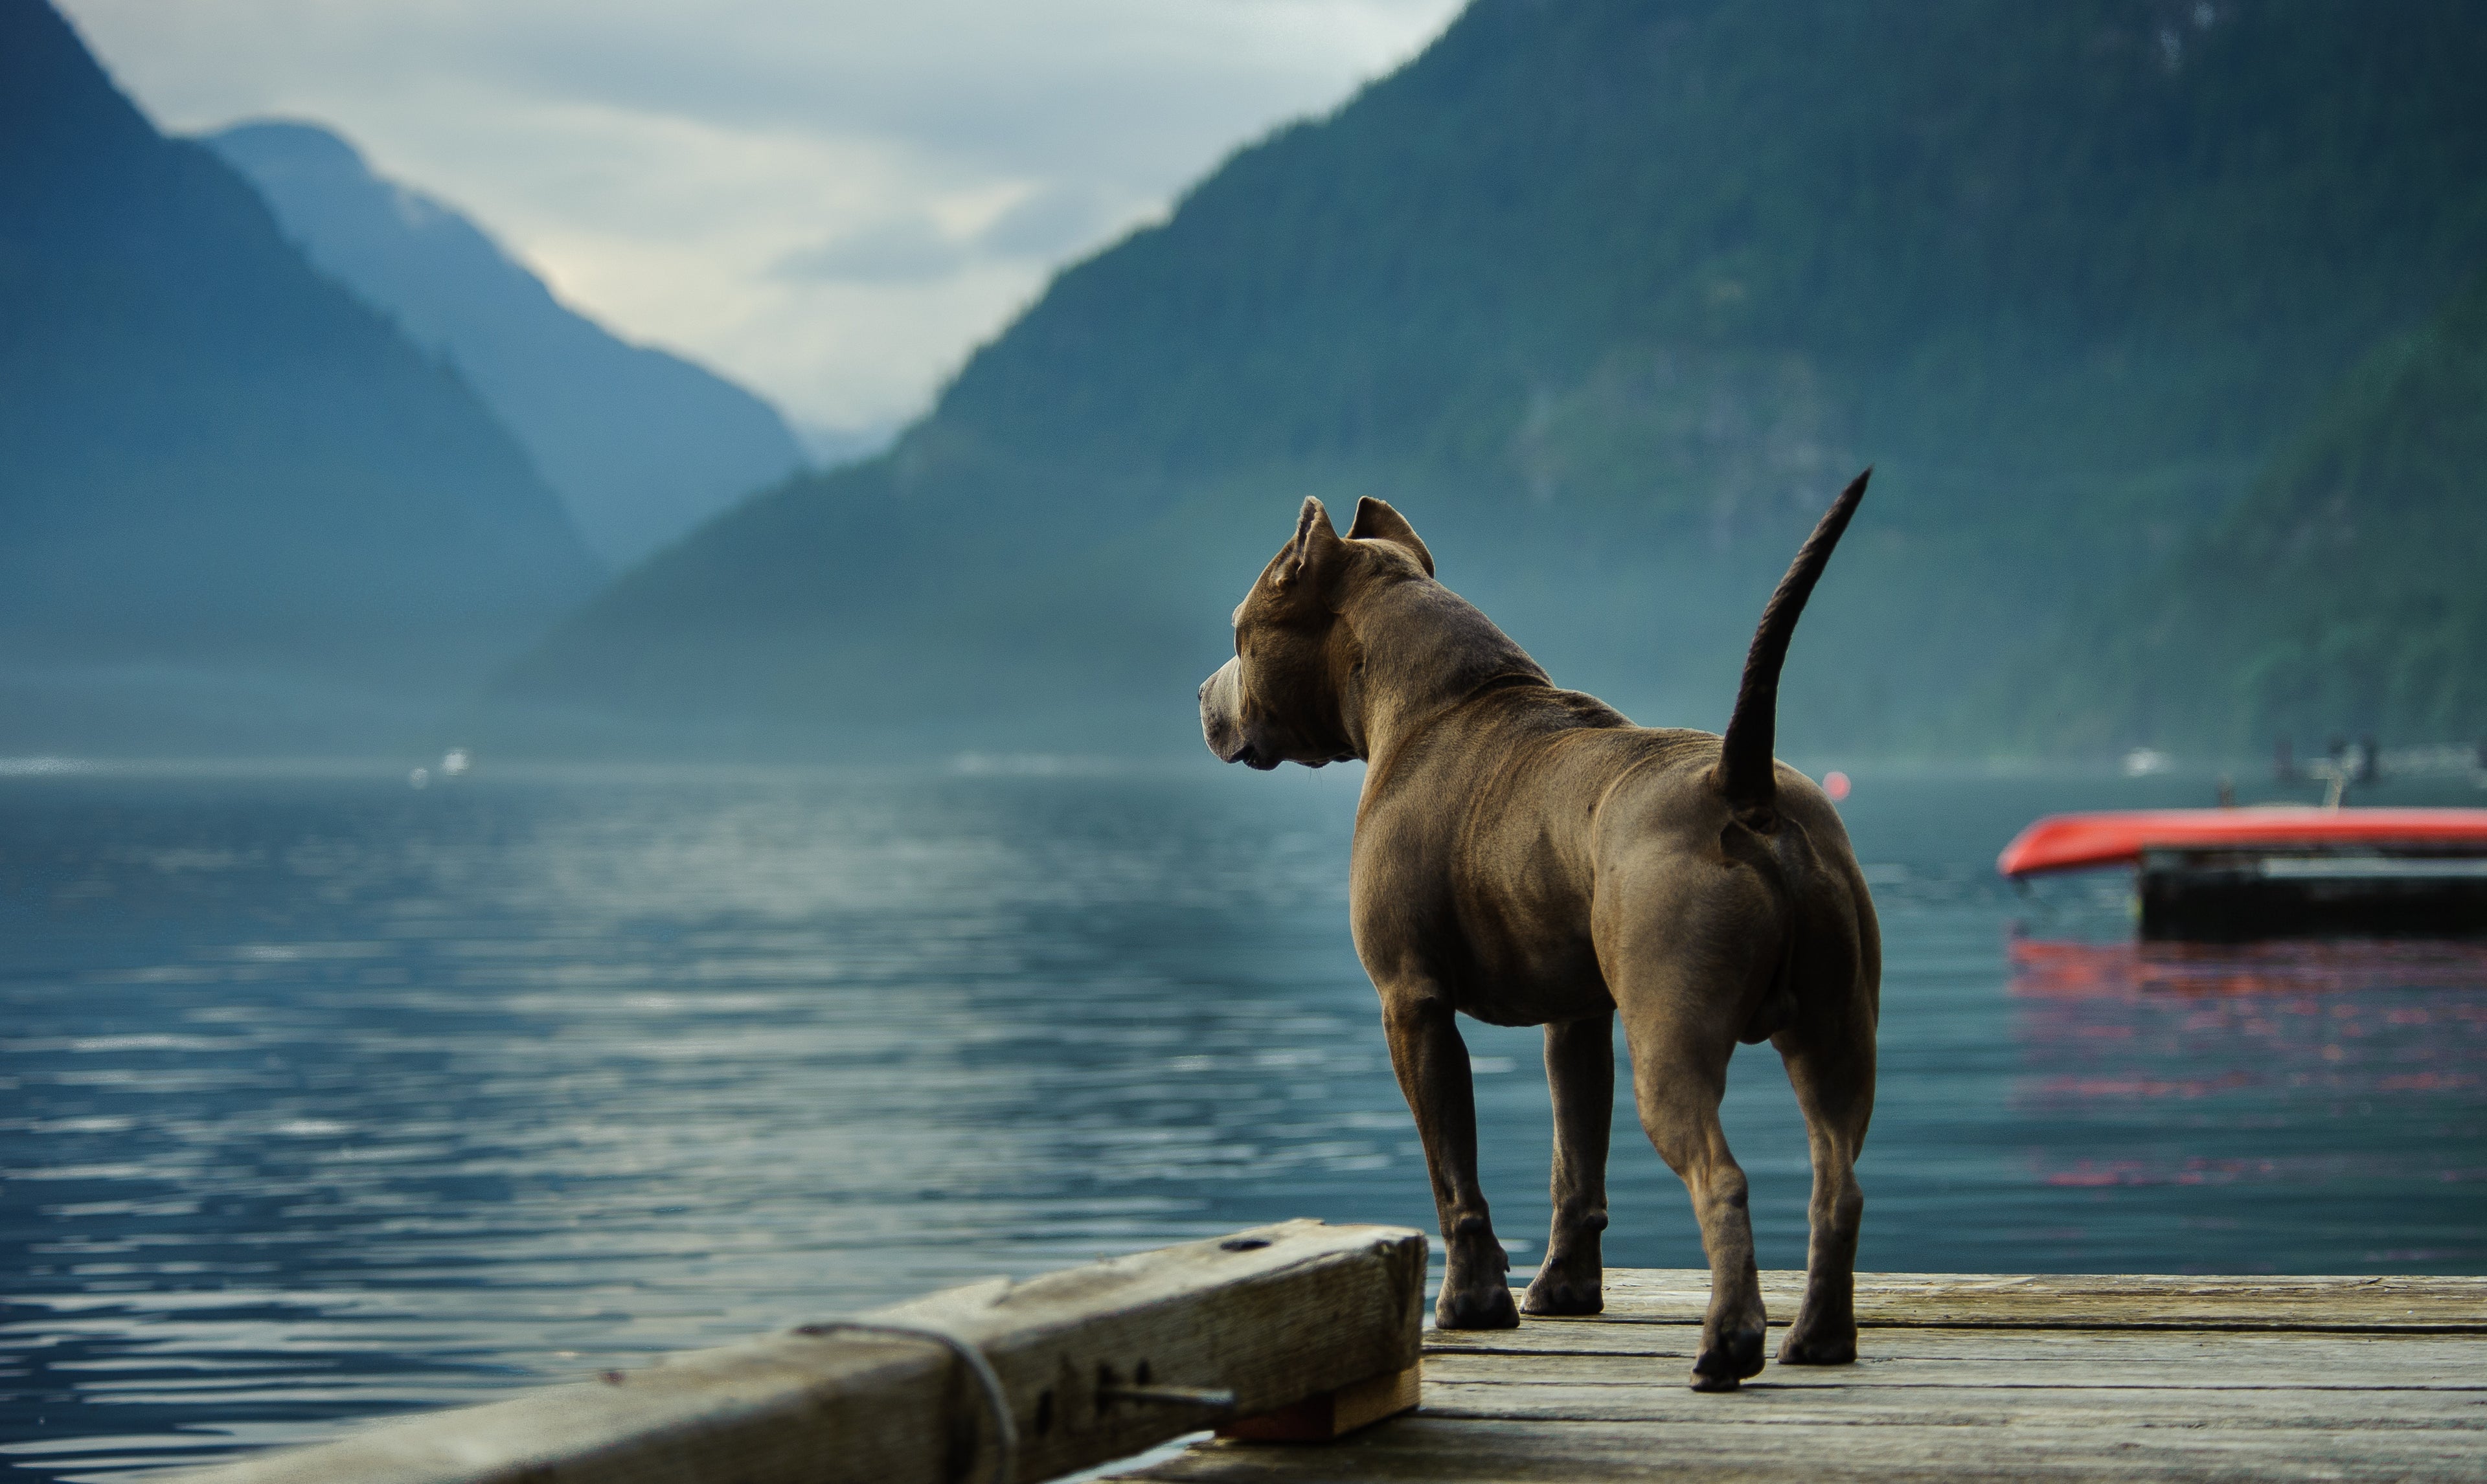 A medium size dog standing on a jetty, looking out over the water with mountains in the background